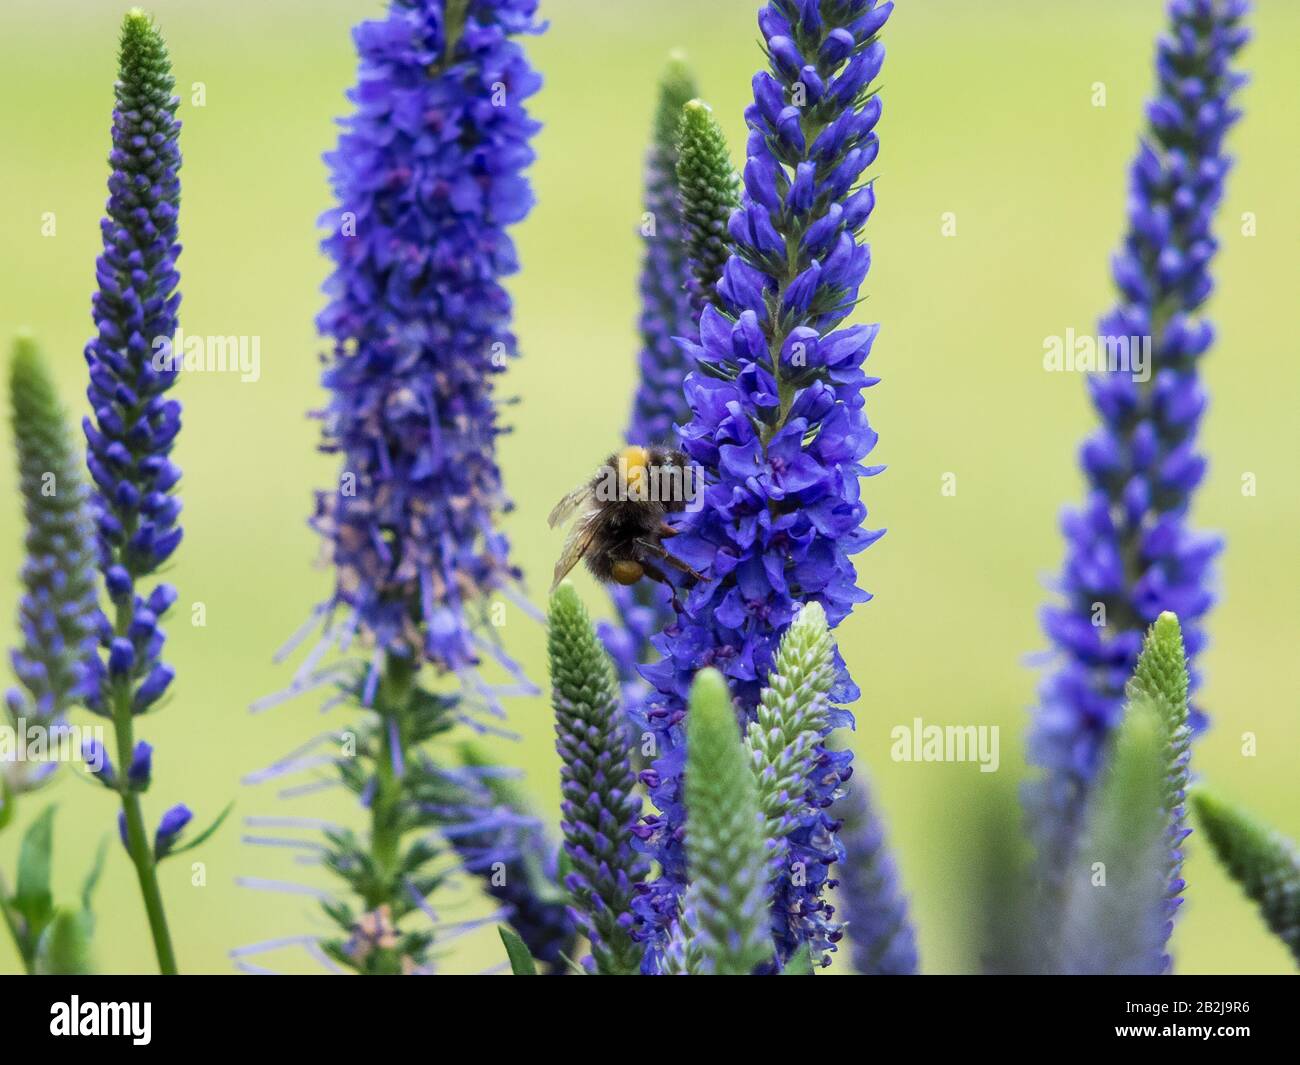 Bee gathering nectar from Veronica Spicata Ulster Dwarf Blue flowers Stock Photo